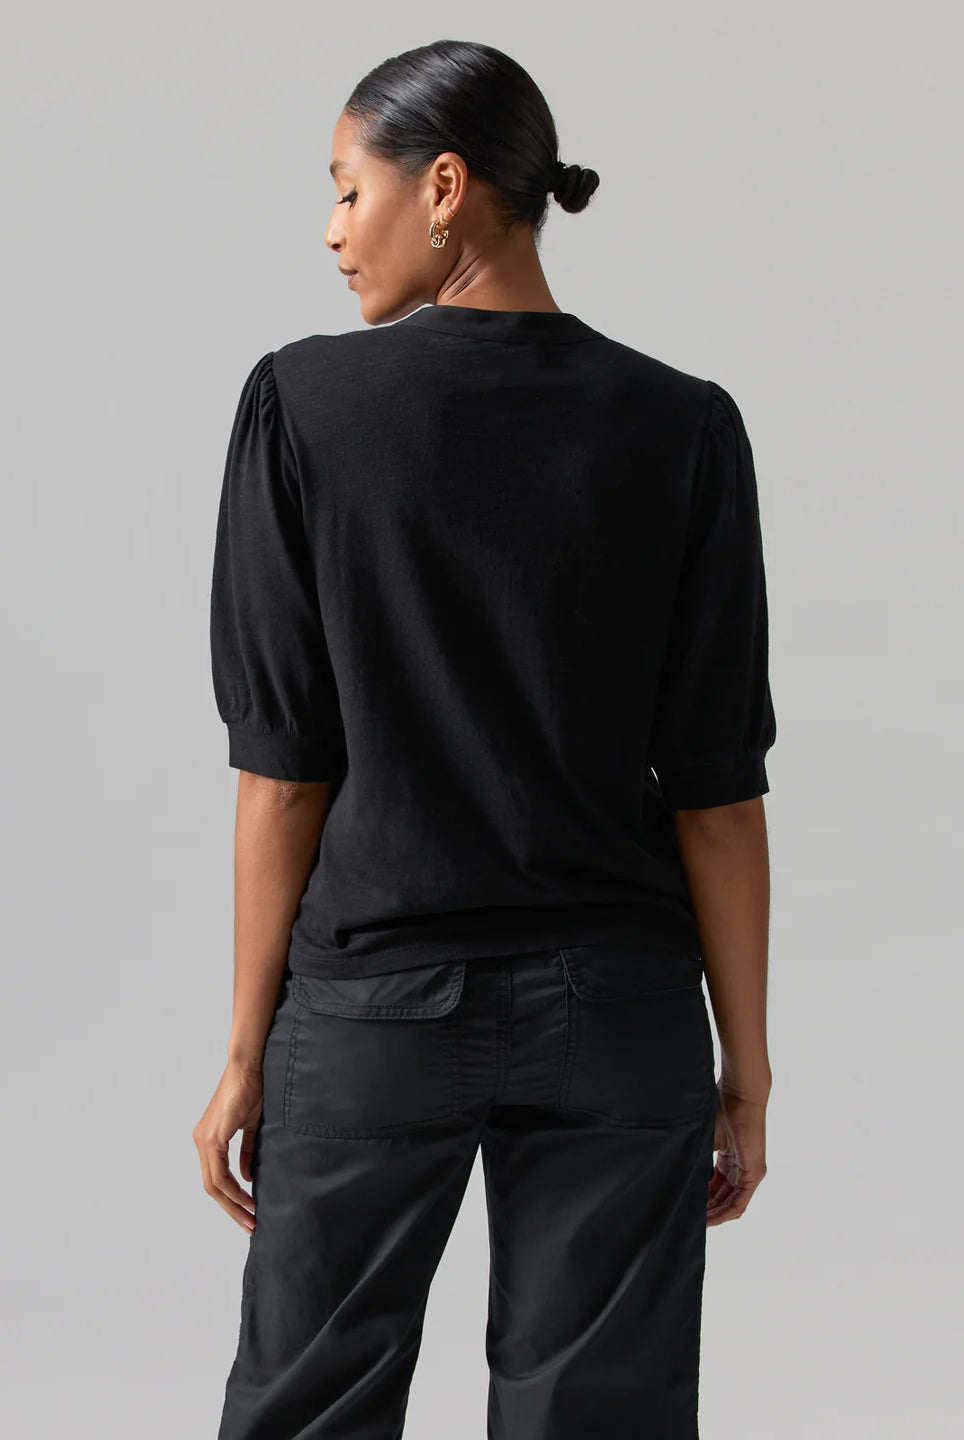 Black 3/4 Sleeve Top Apex Ethical Boutique